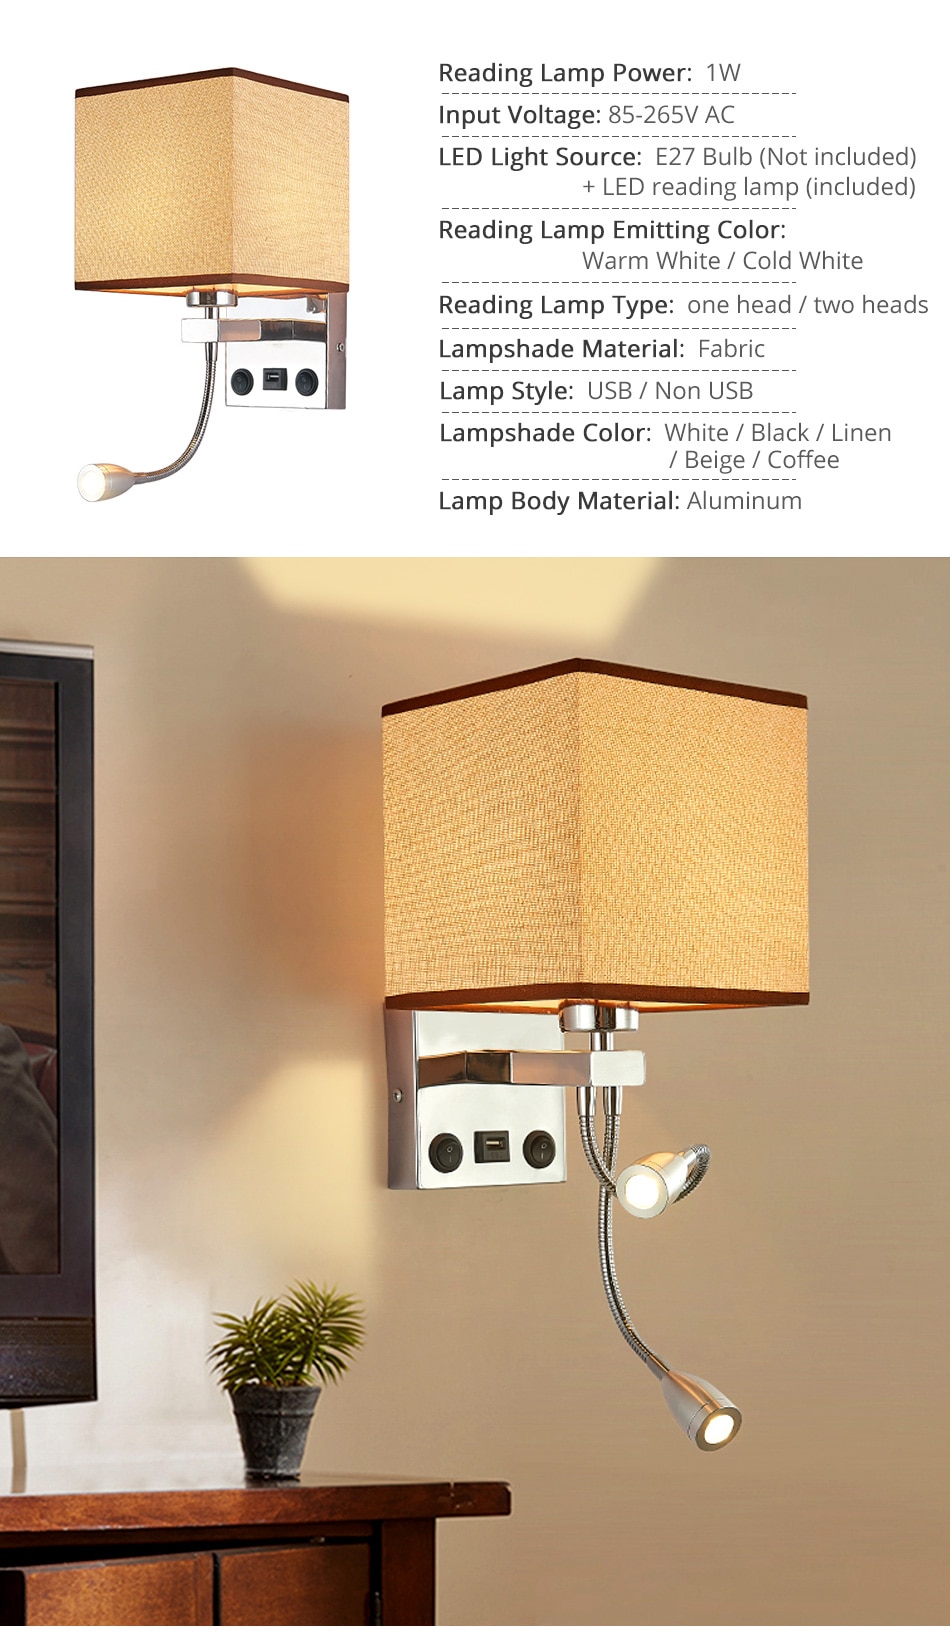 Wall Lights Lamp Sconce Switch Stairs Light Indoor Luminaires Fixture E27 Bulb Bedroom Decor Modern Bedside Lighting For Home